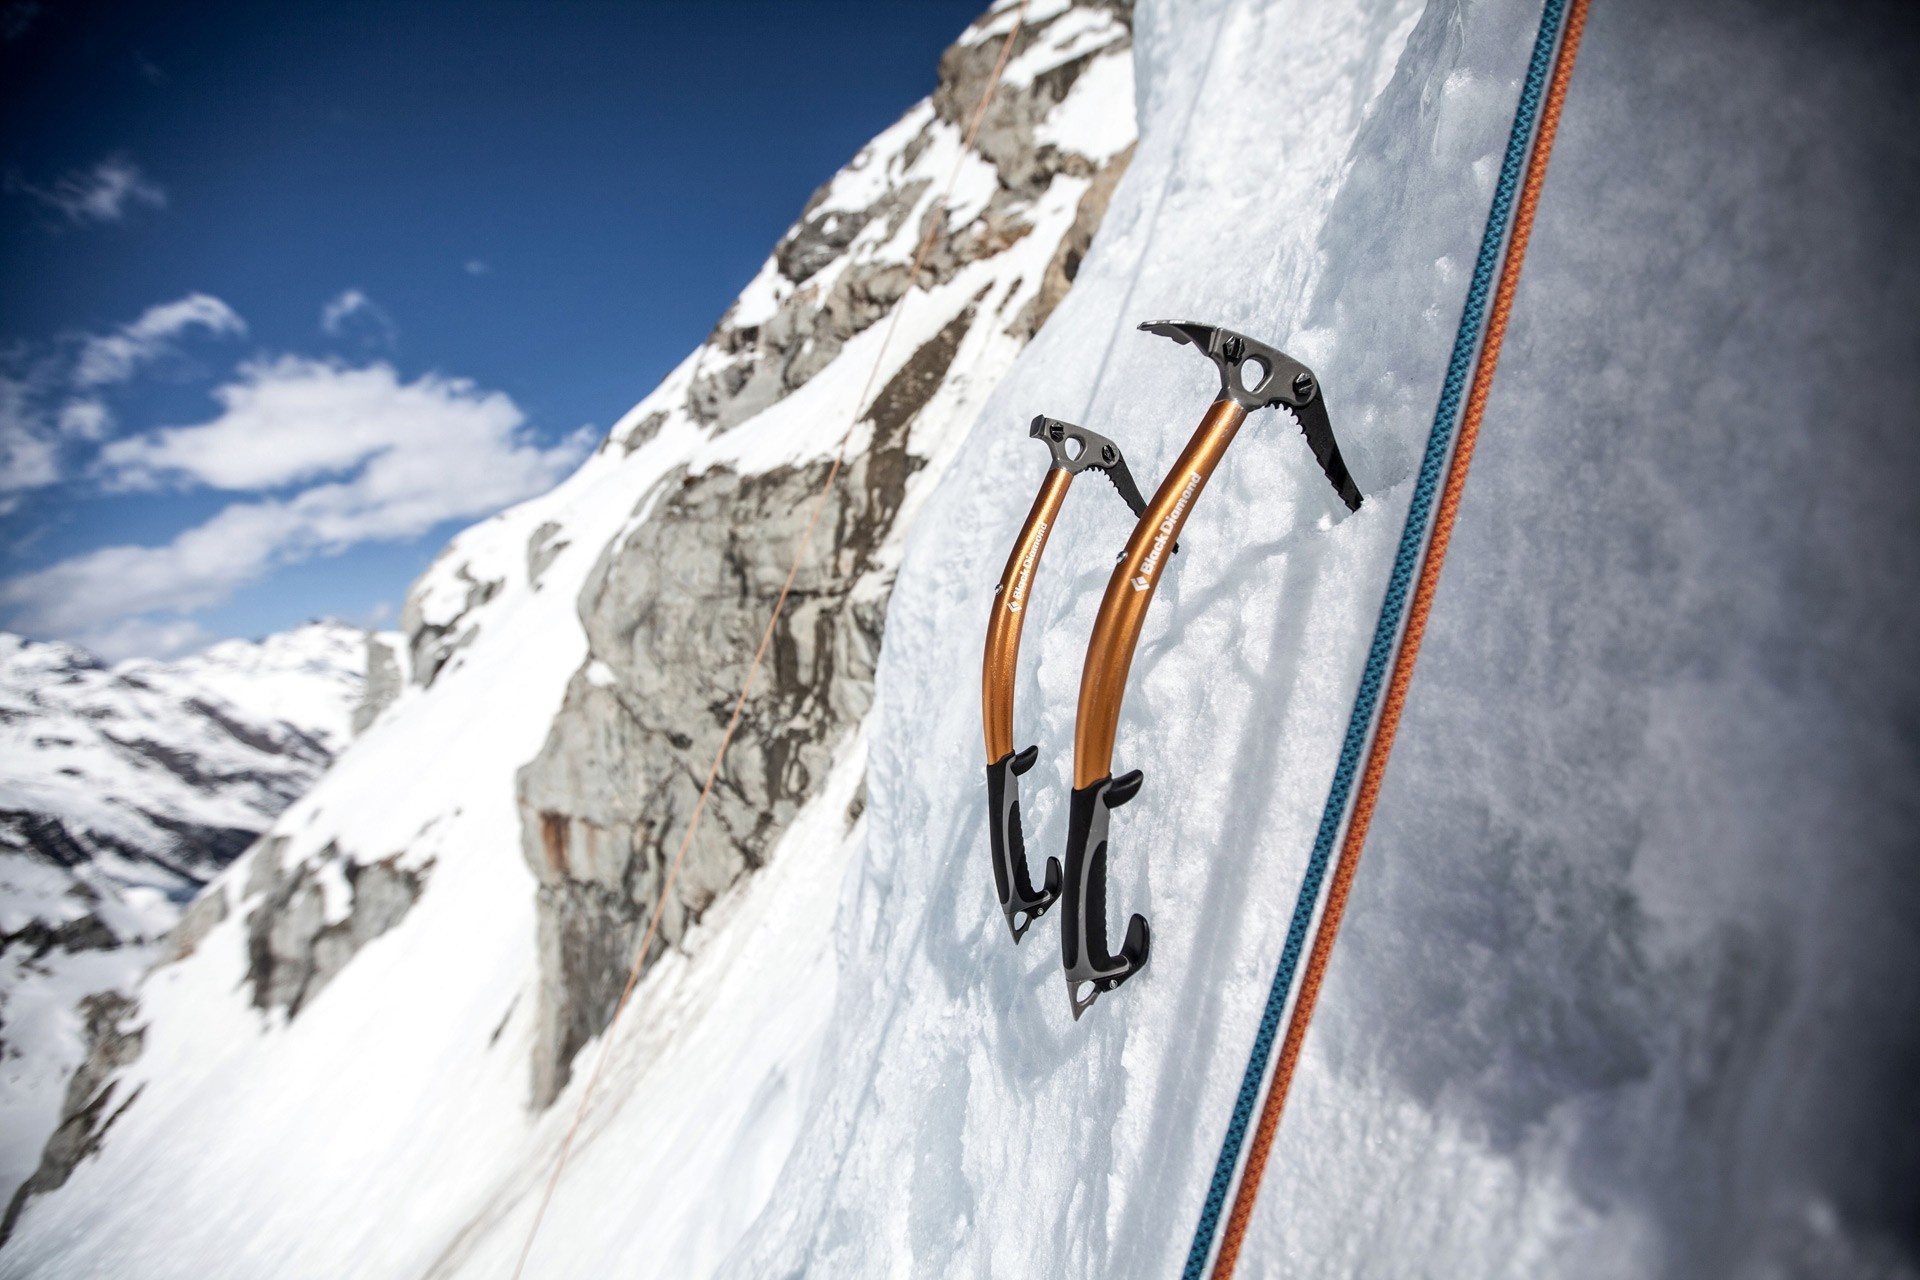 Ice Climbing: Tyrol, Pitztal in Austria, Petzl USA Equipment For Sports Enthusiasts And Professionals. 1920x1280 HD Wallpaper.